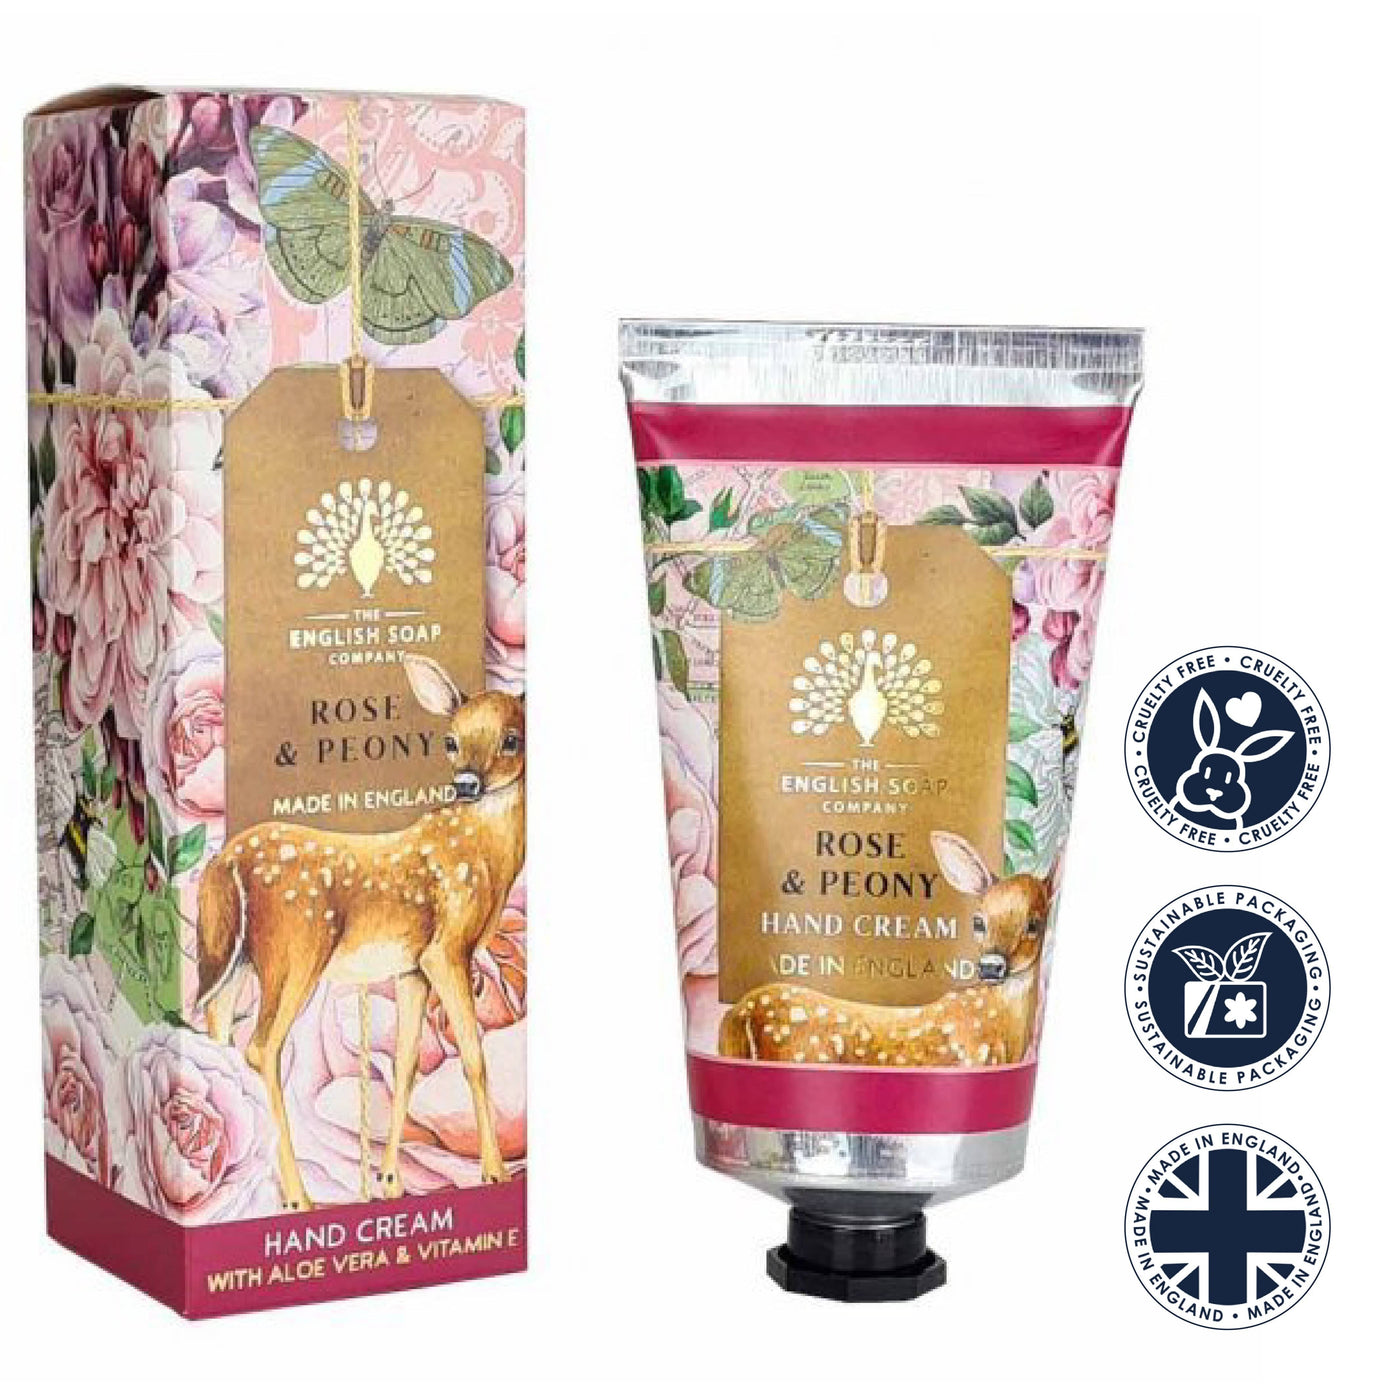 Rose and Peony Hand Cream 75ml from our Hand Cream collection by The English Soap Company